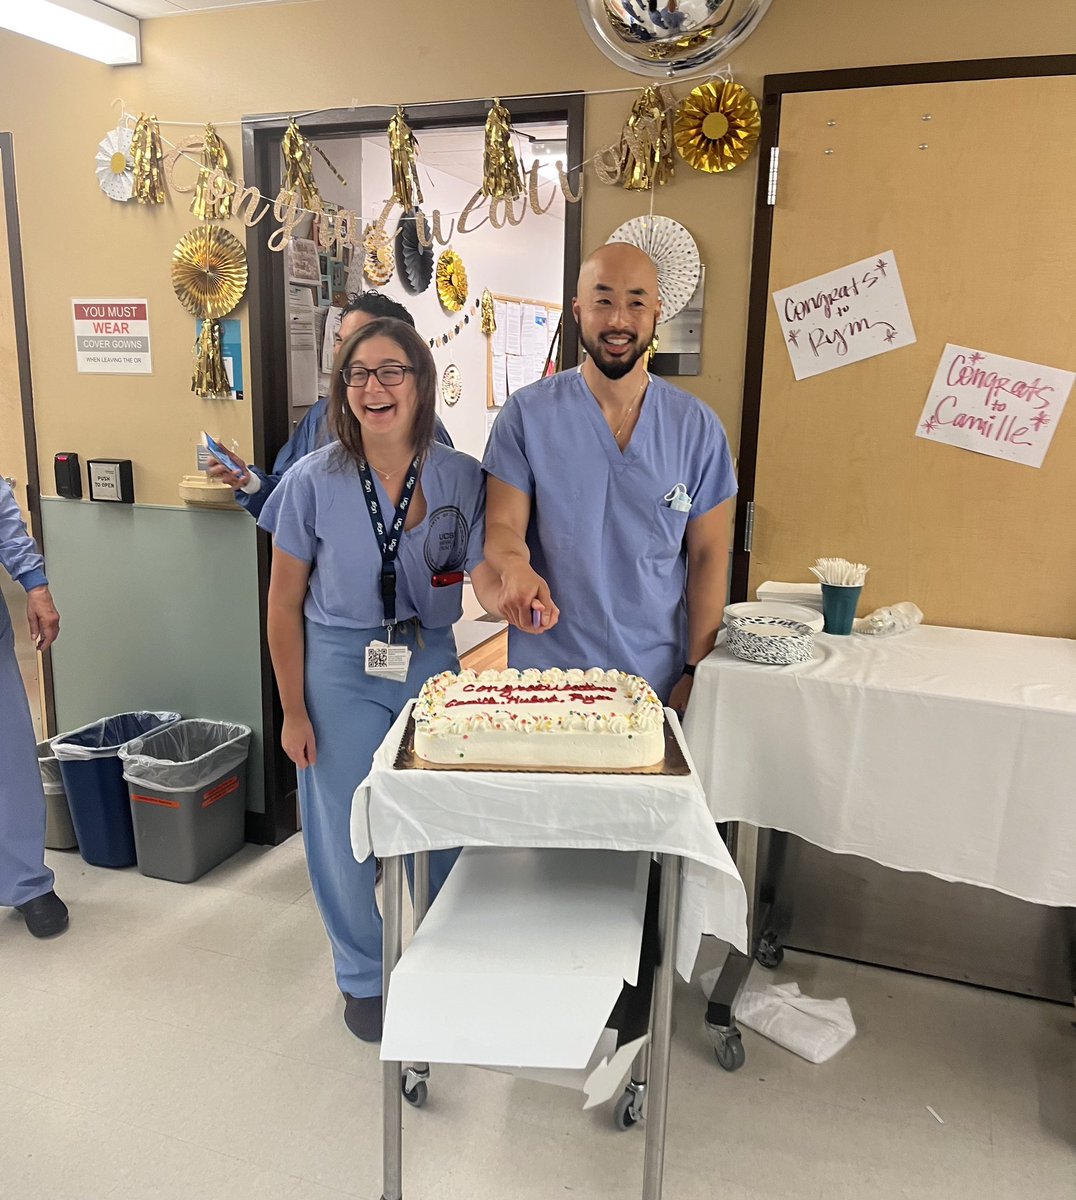 🎉Continuing the celebration along with graduating @UCSFCTSurgery fellow, Dr. Hubert Luu. Thank you to the OR staff! (Celebrating from the OR/not pictured: Dr. Jackson)